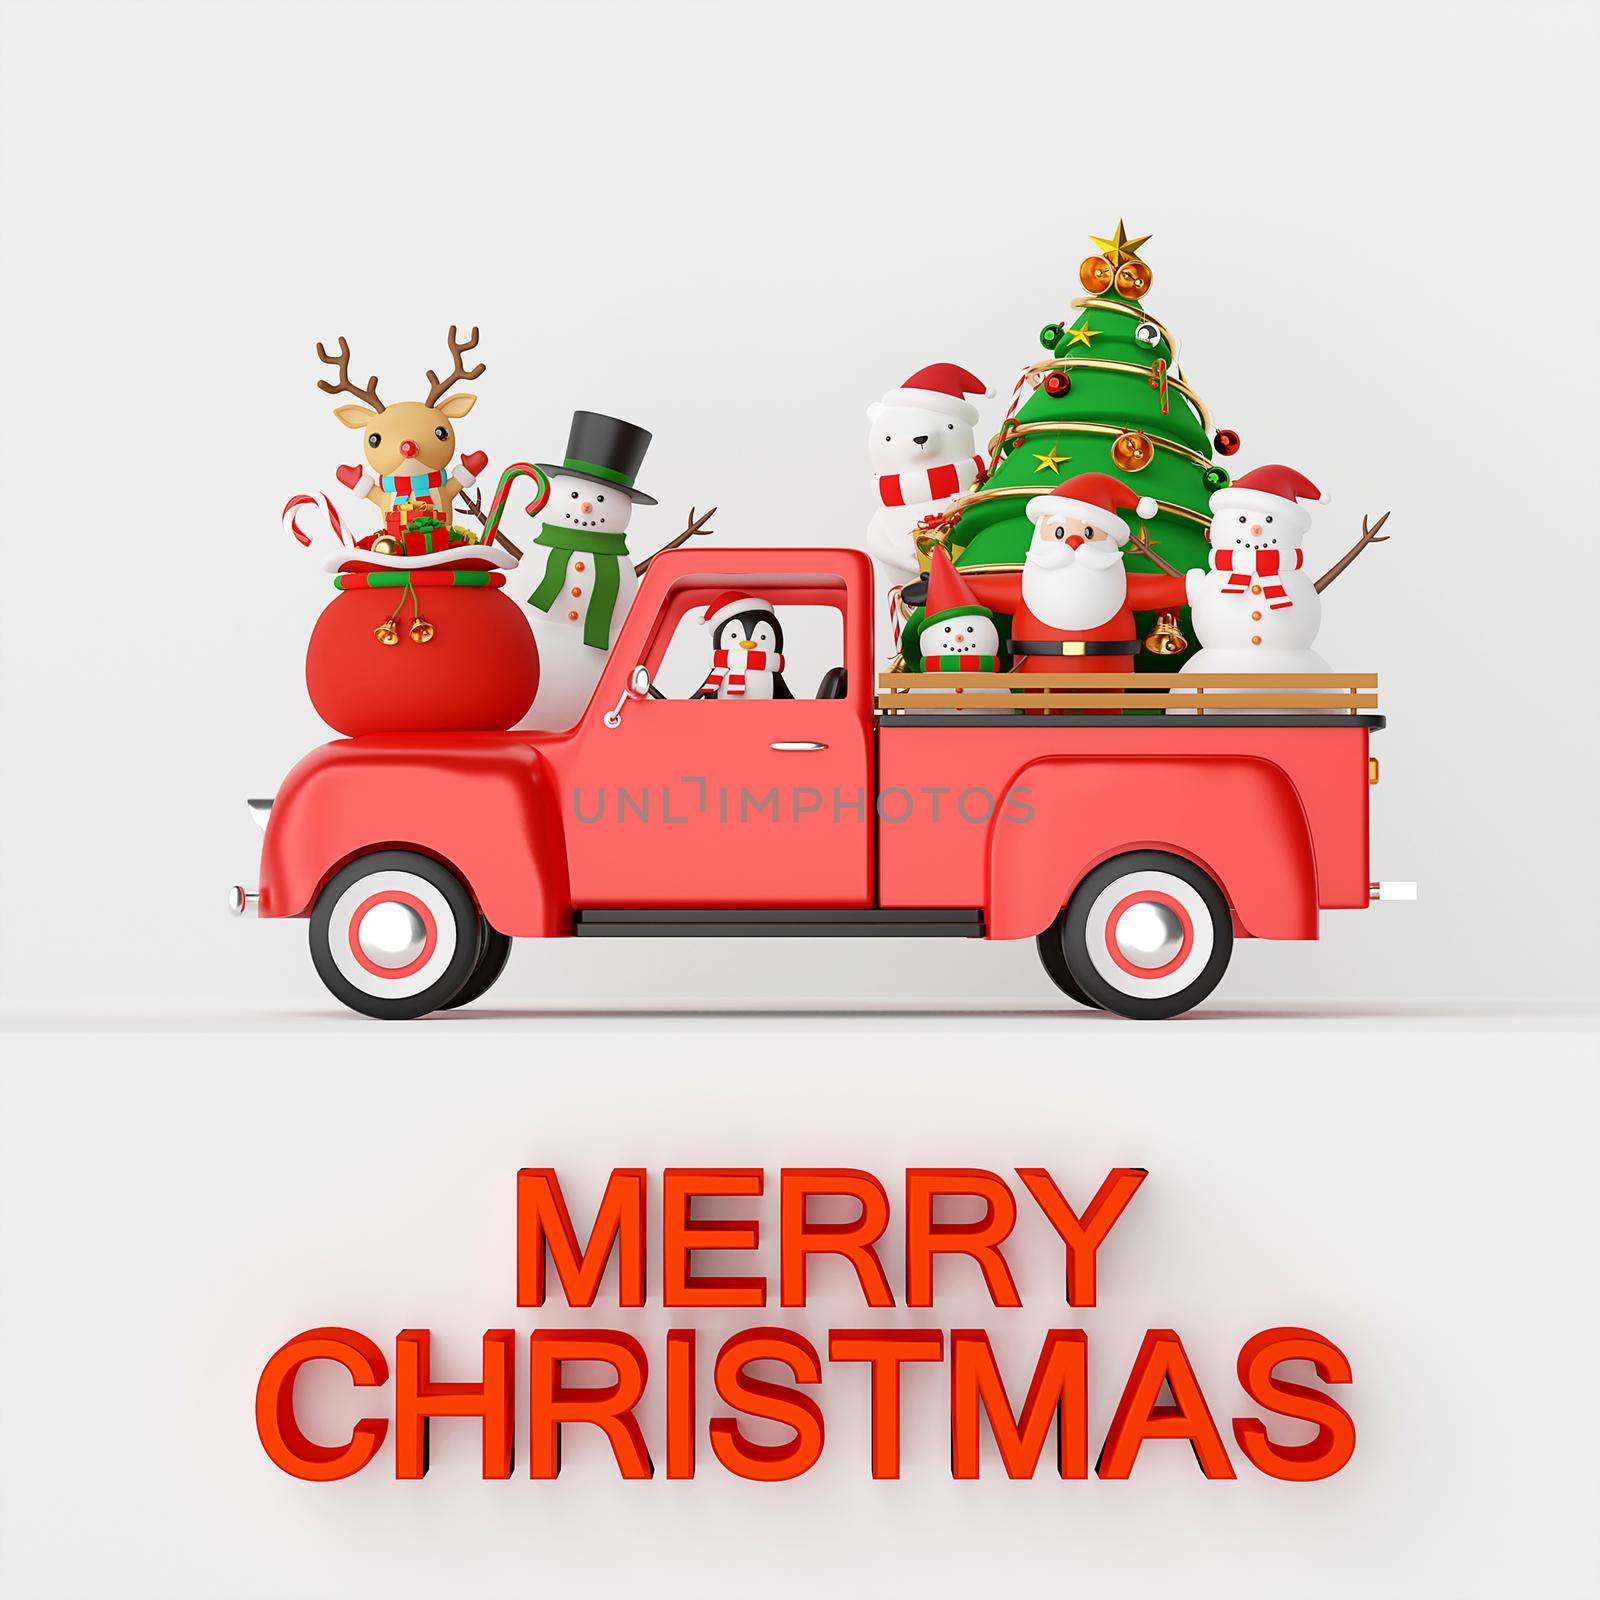 Merry Christmas and Happy New Year, Christmas celebration with Santa Claus and friends on Christmas truck, 3d rendering by nutzchotwarut